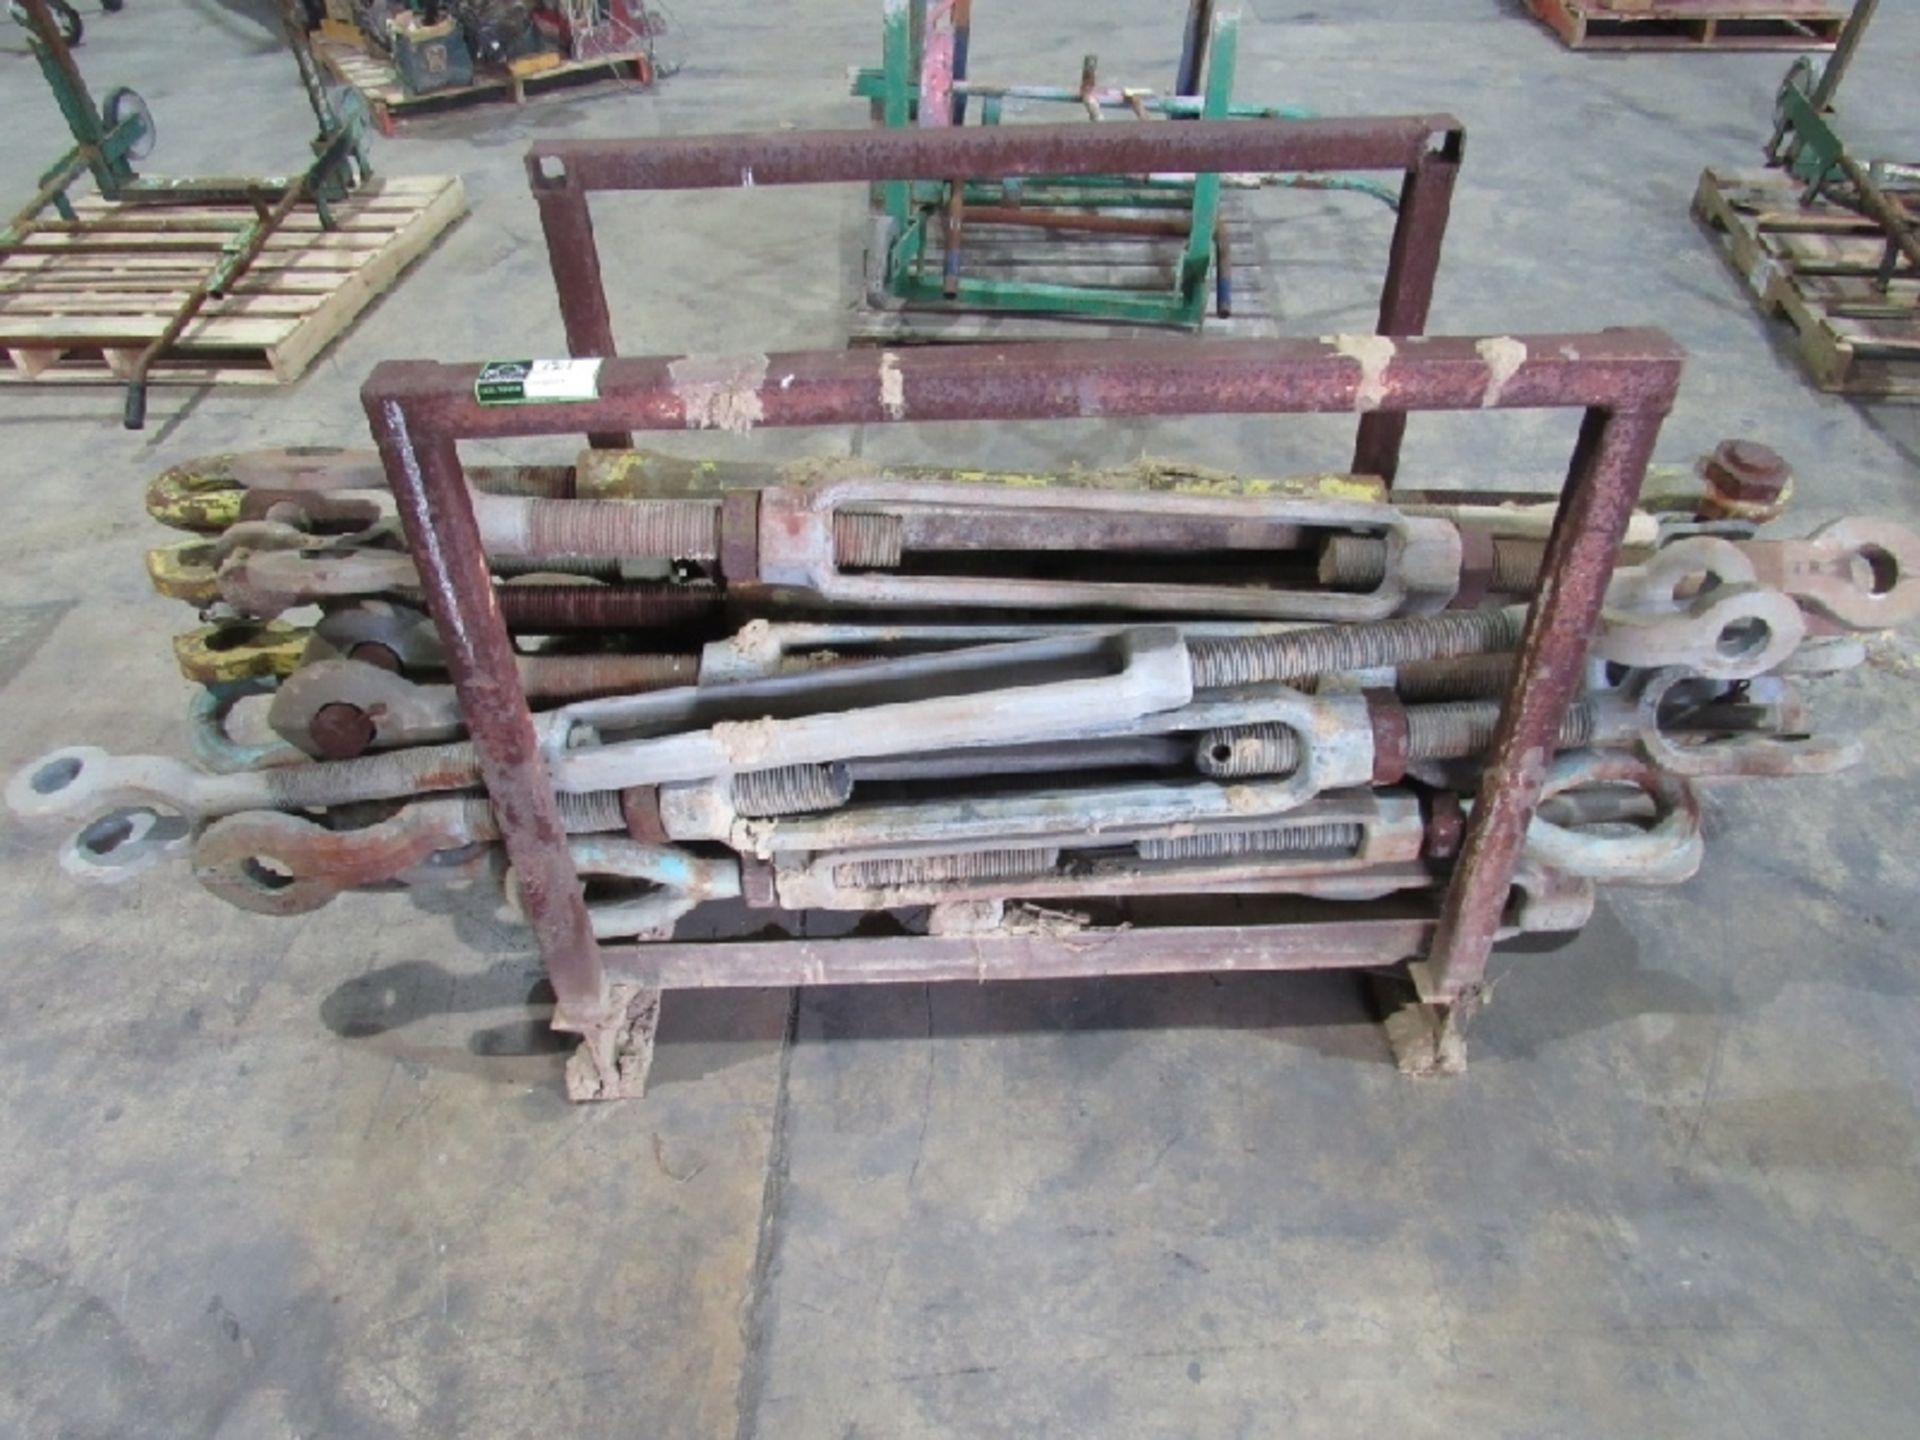 (approx qty - 20) Turnbuckles and Rack- ***Located in Chattanooga, TN*** MFR - Unknown Sizes Range